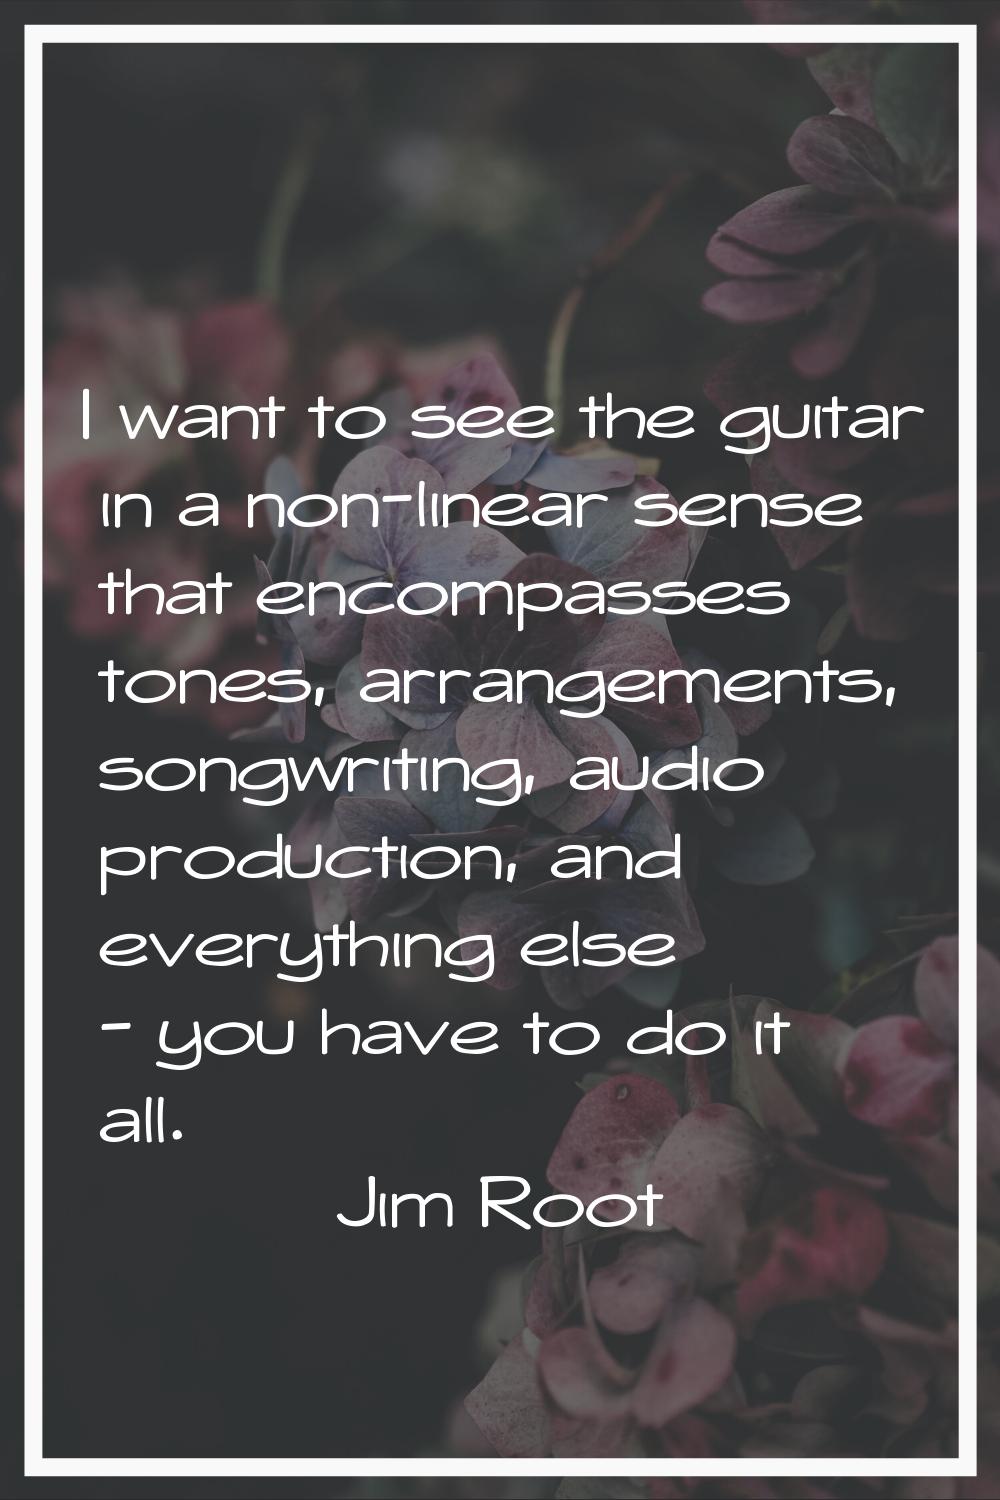 I want to see the guitar in a non-linear sense that encompasses tones, arrangements, songwriting, a